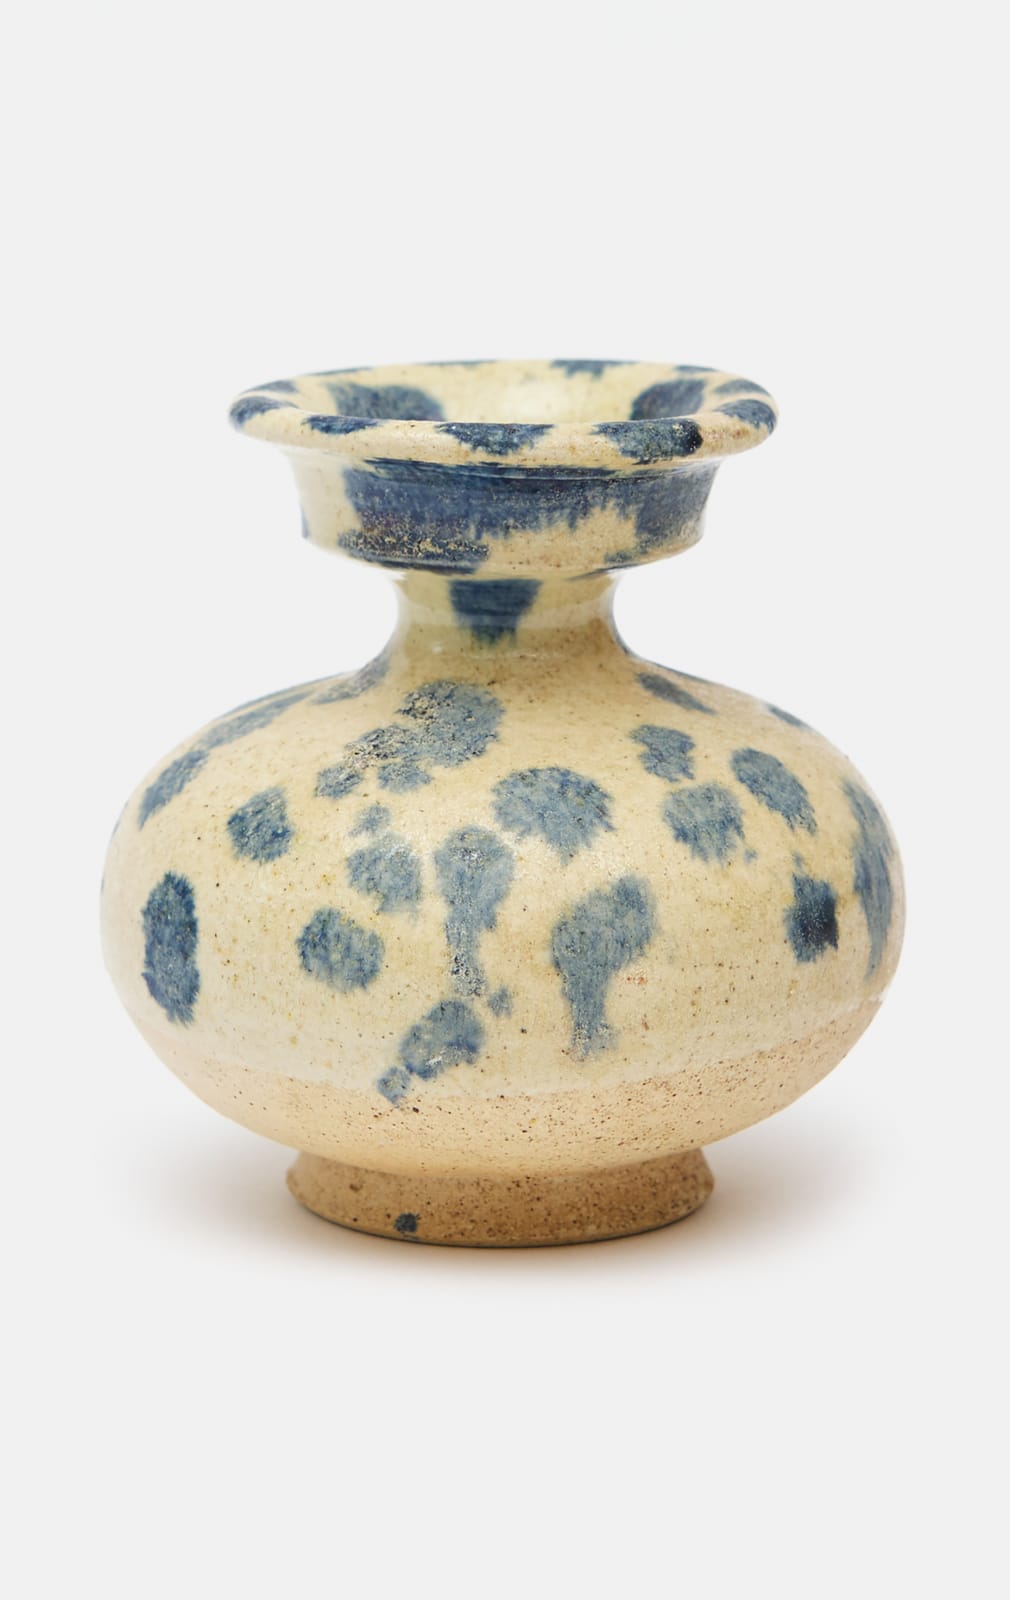 Anon, A small blue-splashed spittoon ‘zhadou’ , Tang dynasty, 8th century